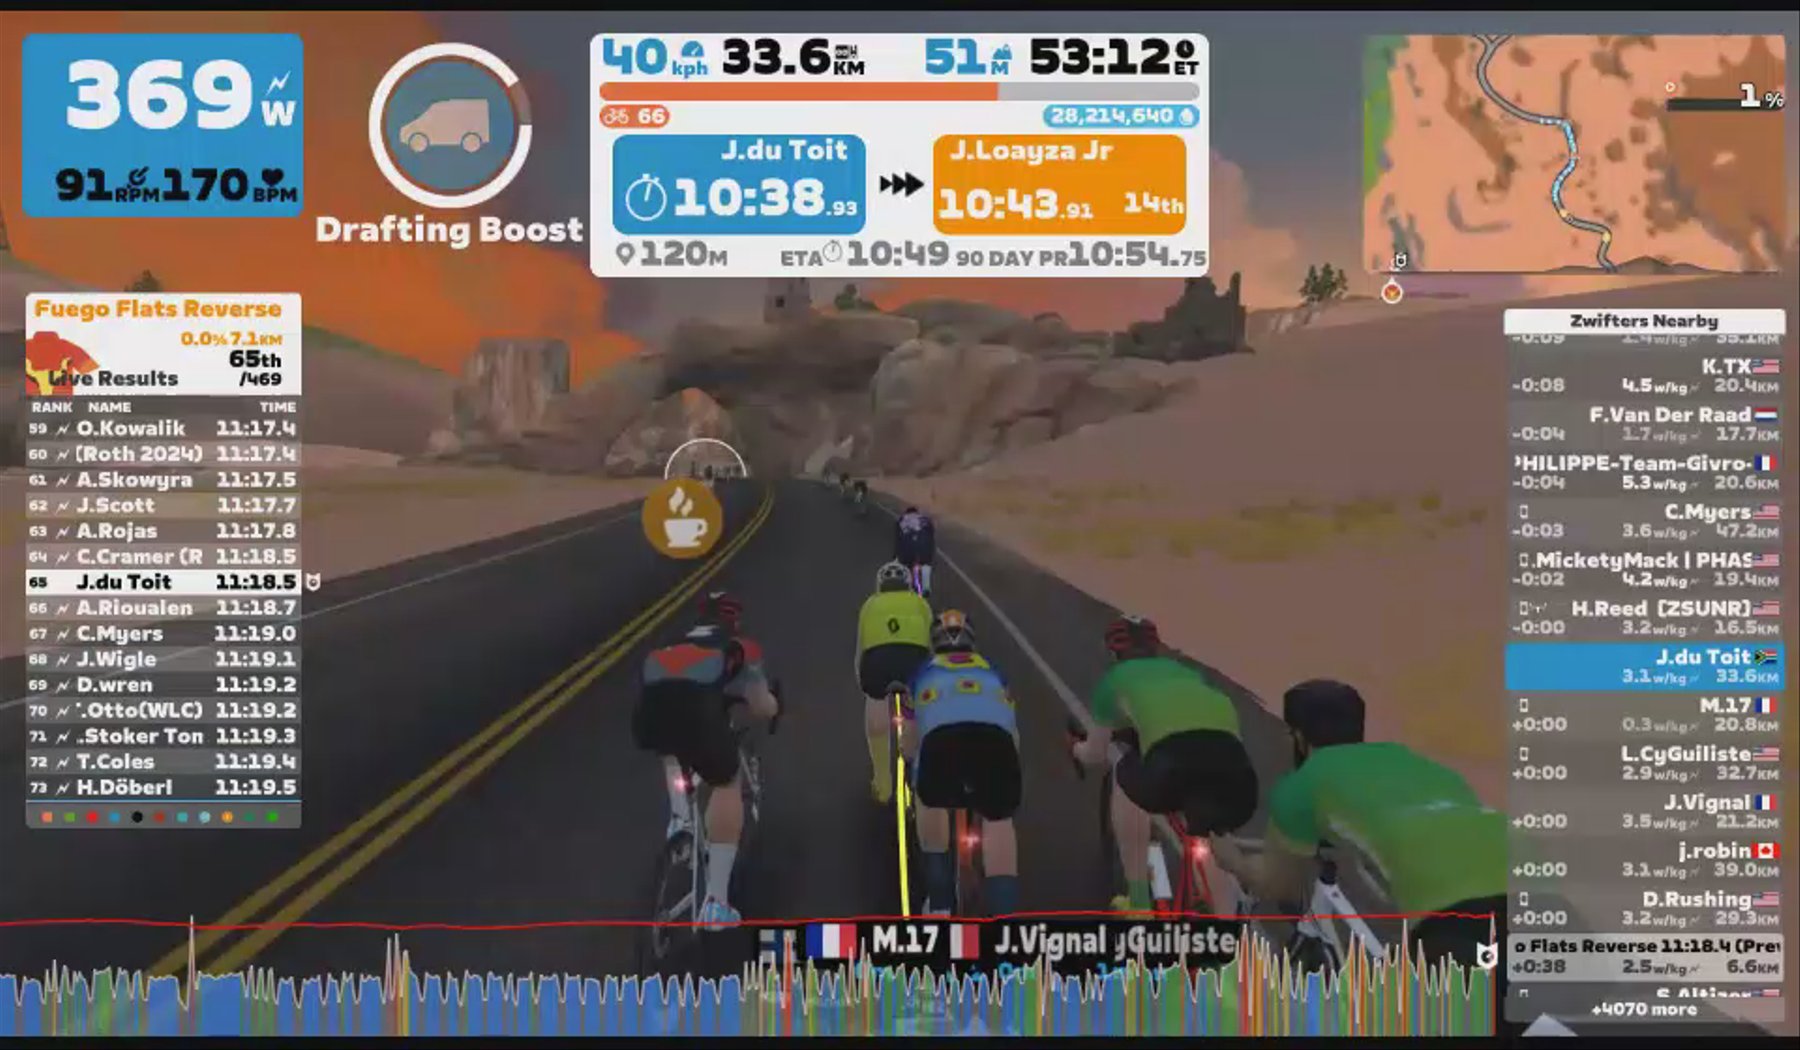 Zwift - Pacer Group Ride: Tempus Fugit in Watopia with Maria